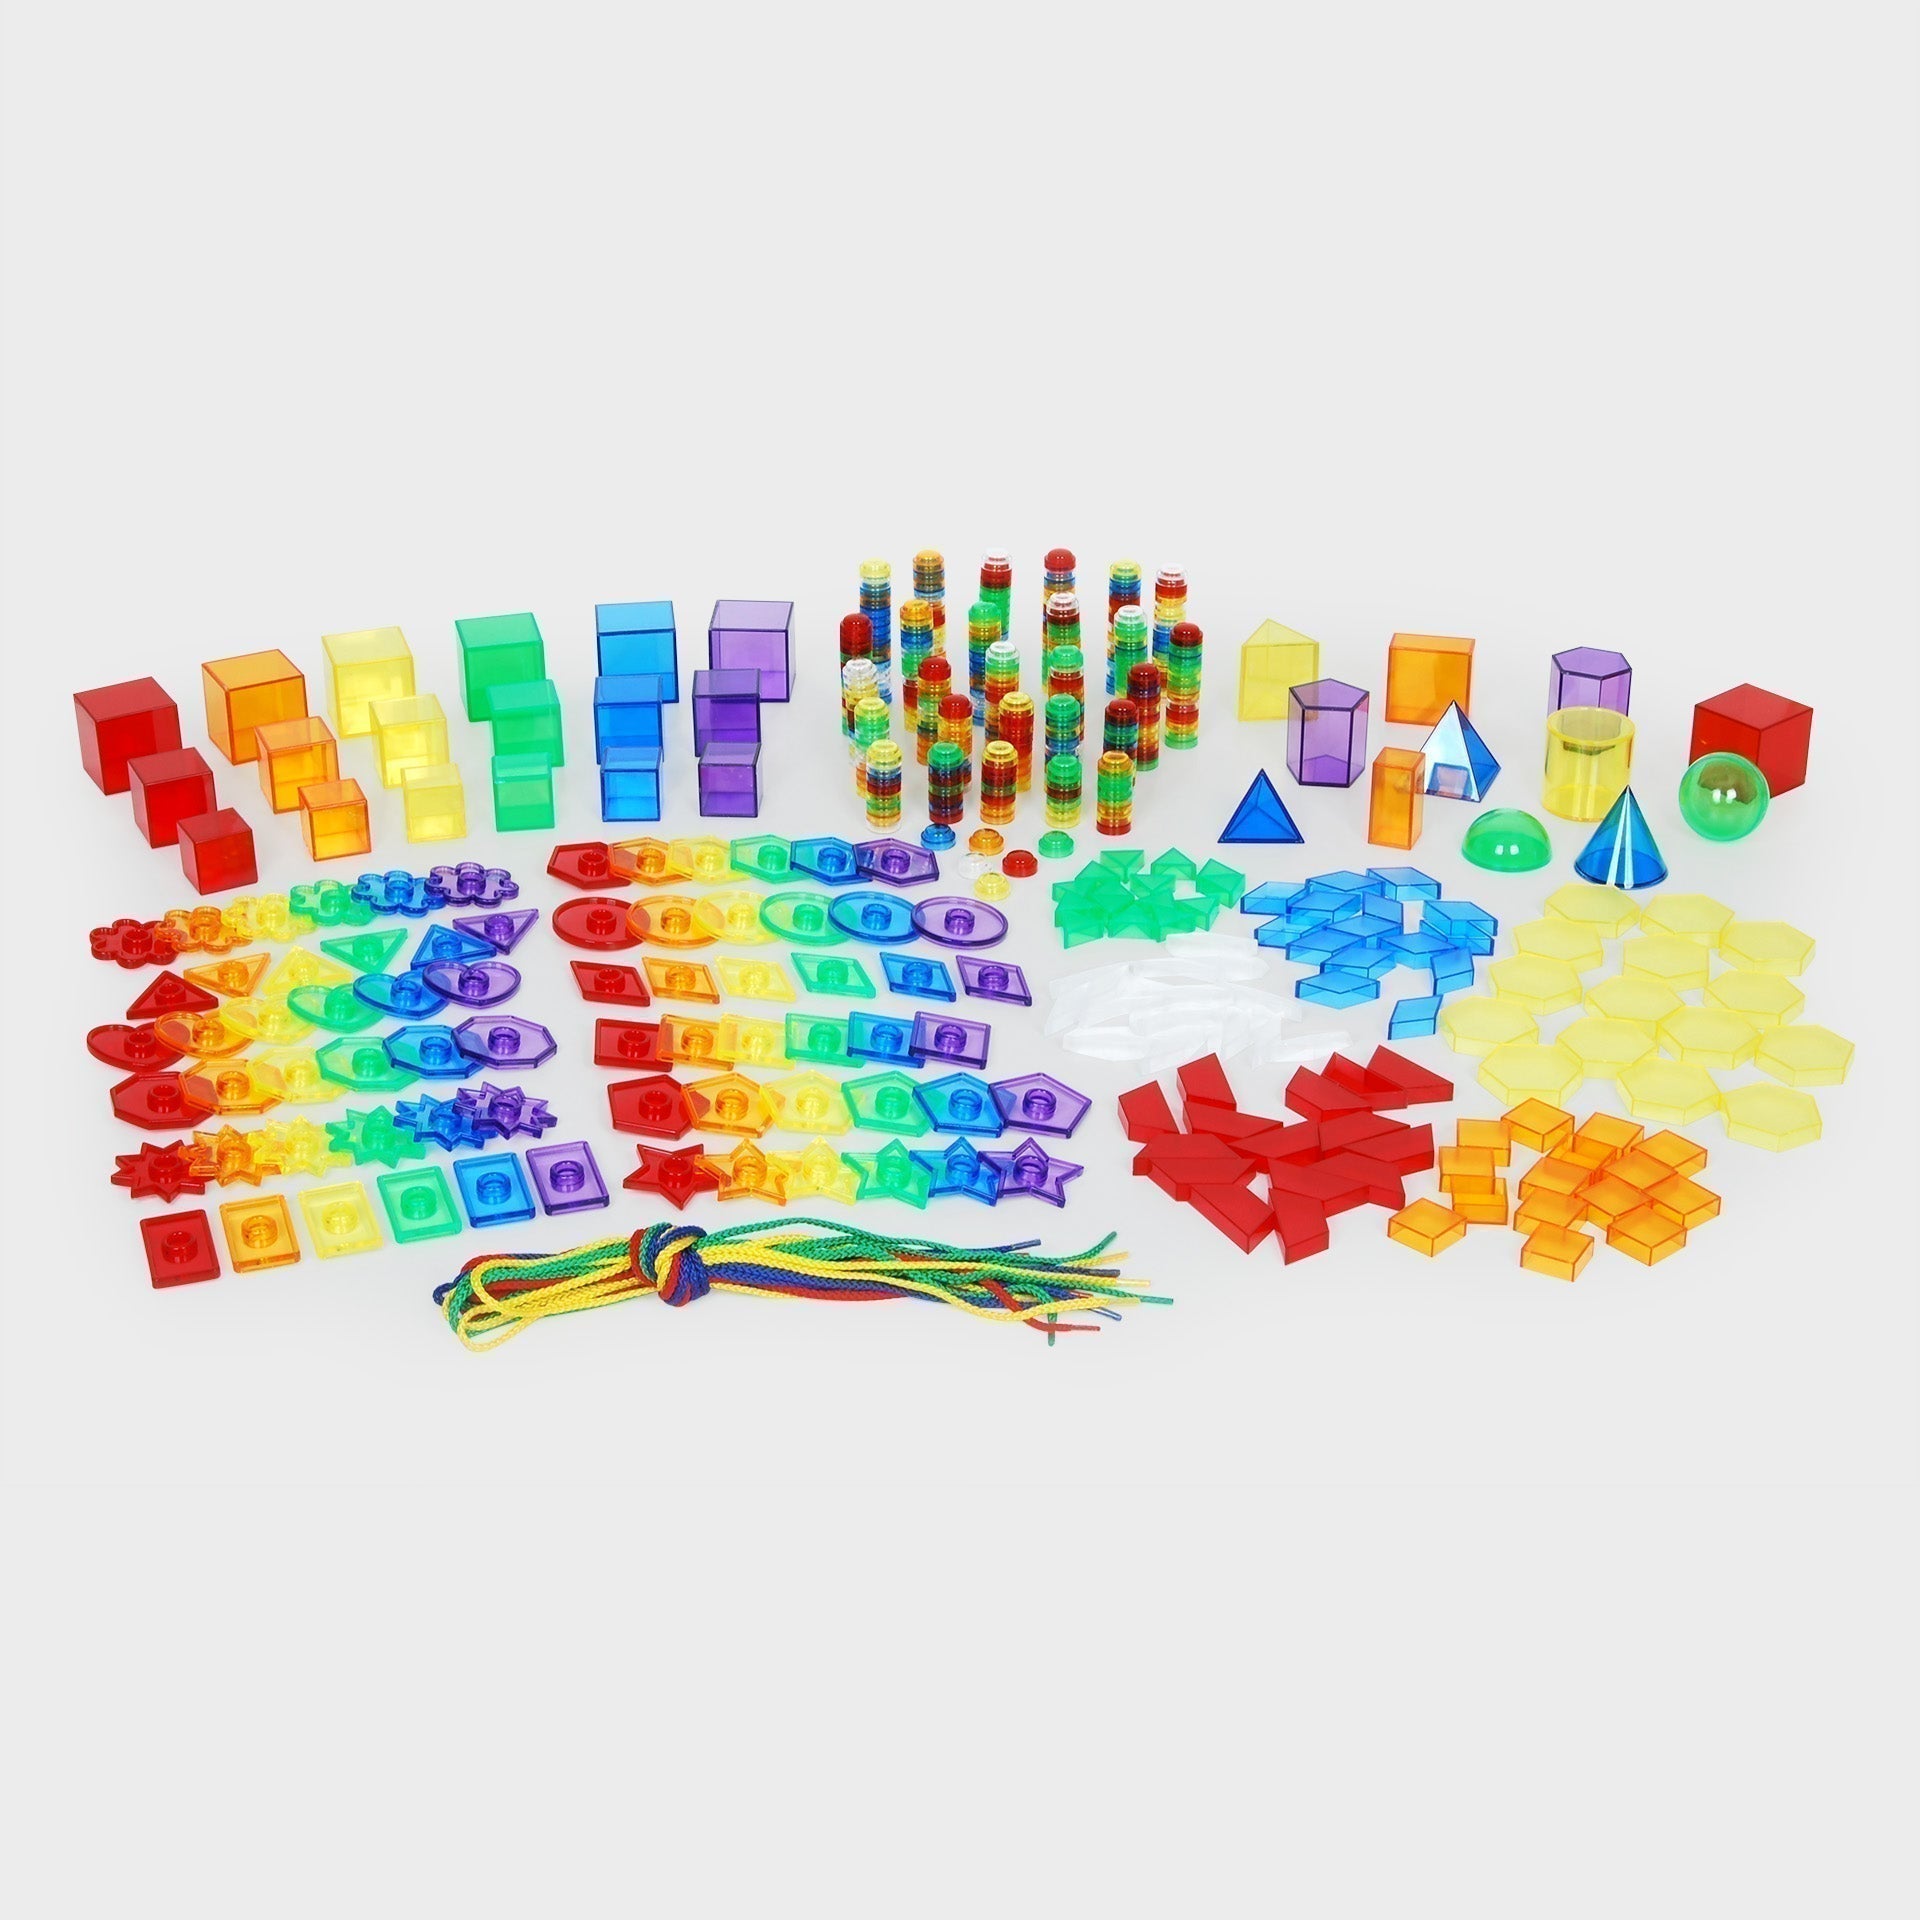 Early Years Maths Resource Set, The Early Years Maths Resource Set is a bumper pack of nearly 500 translucent acrylic colour maths resources and laces, The Early Years Maths Resource Set is ideal for using on a light panel for exploring mathematical topics such as shape and attributes, counting and sorting, pattern and sequence, all whilst developing fine motor skills and inspiring creative play. The Early Years Maths Resource Set contains beautiful translucent resources come in 6 colours as well as clear, 